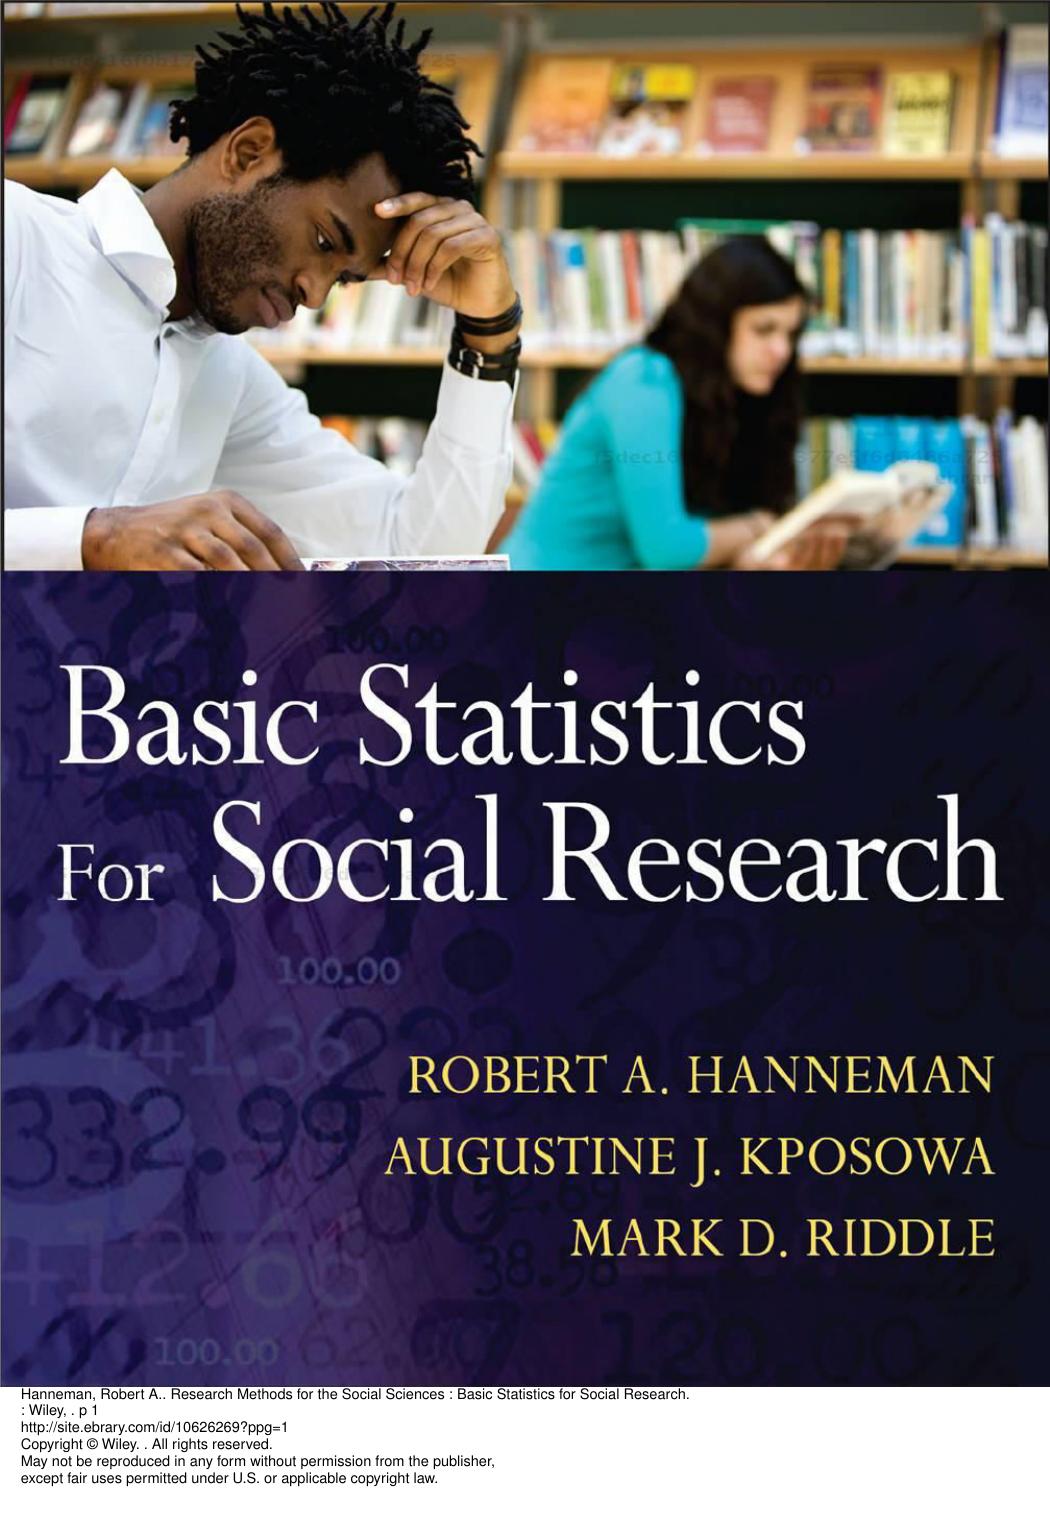 Research Methods for the Social Sciences 2004